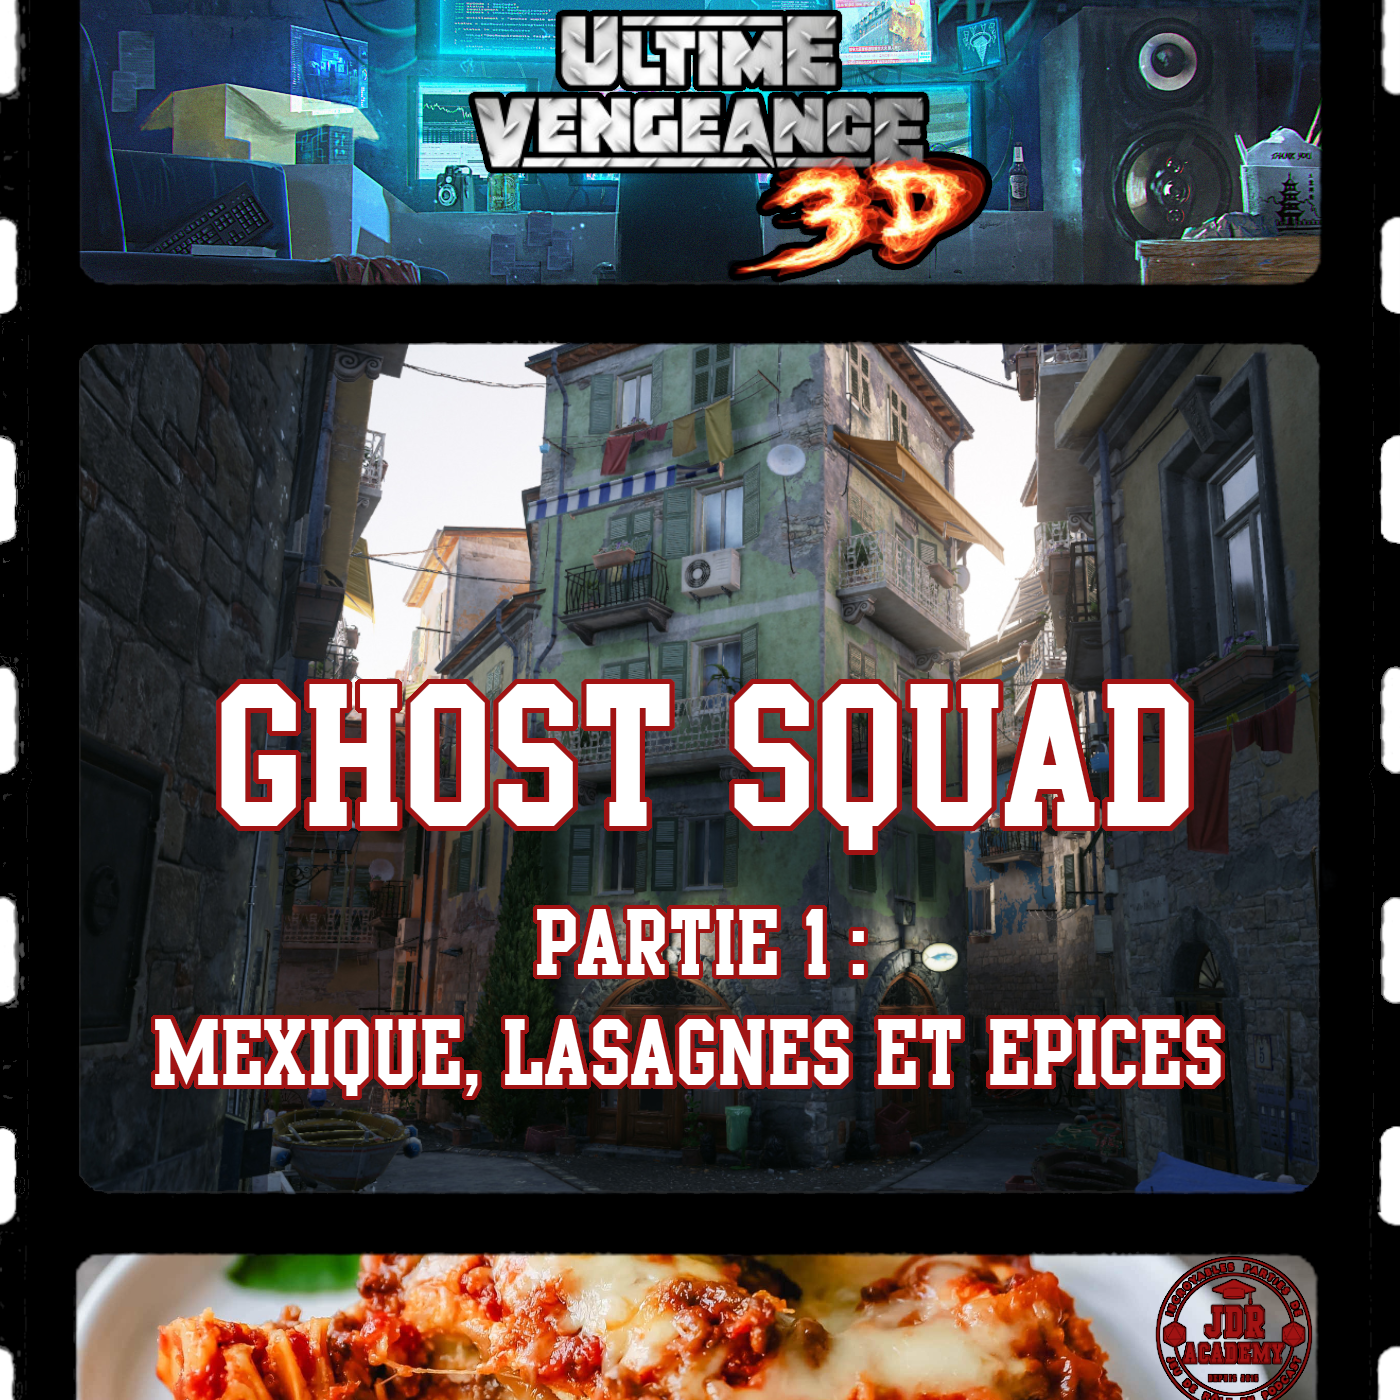 ULTIME VENGEANCE 3D – Ghost Squad (1/2)